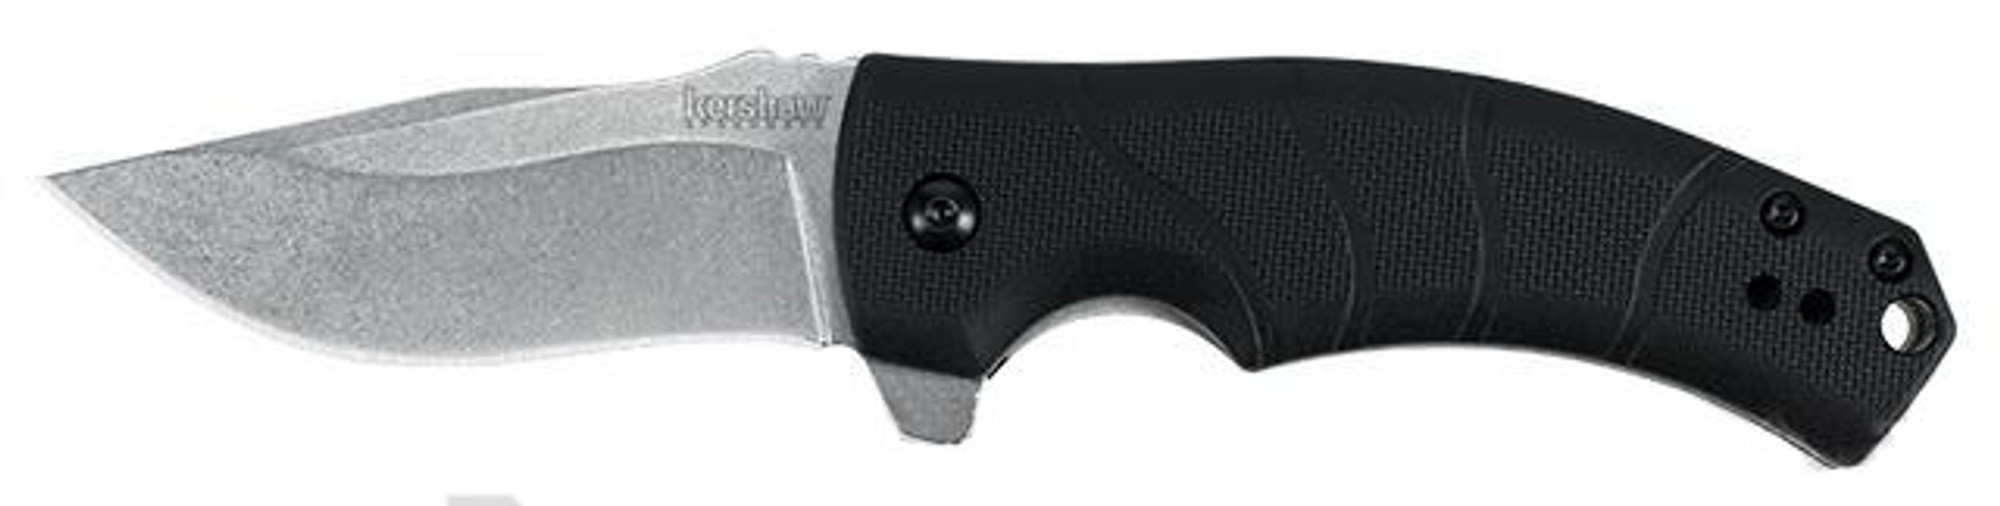 Kershaw Valmara Folding Knife with 3.00" Blade and Speed Assist Opening